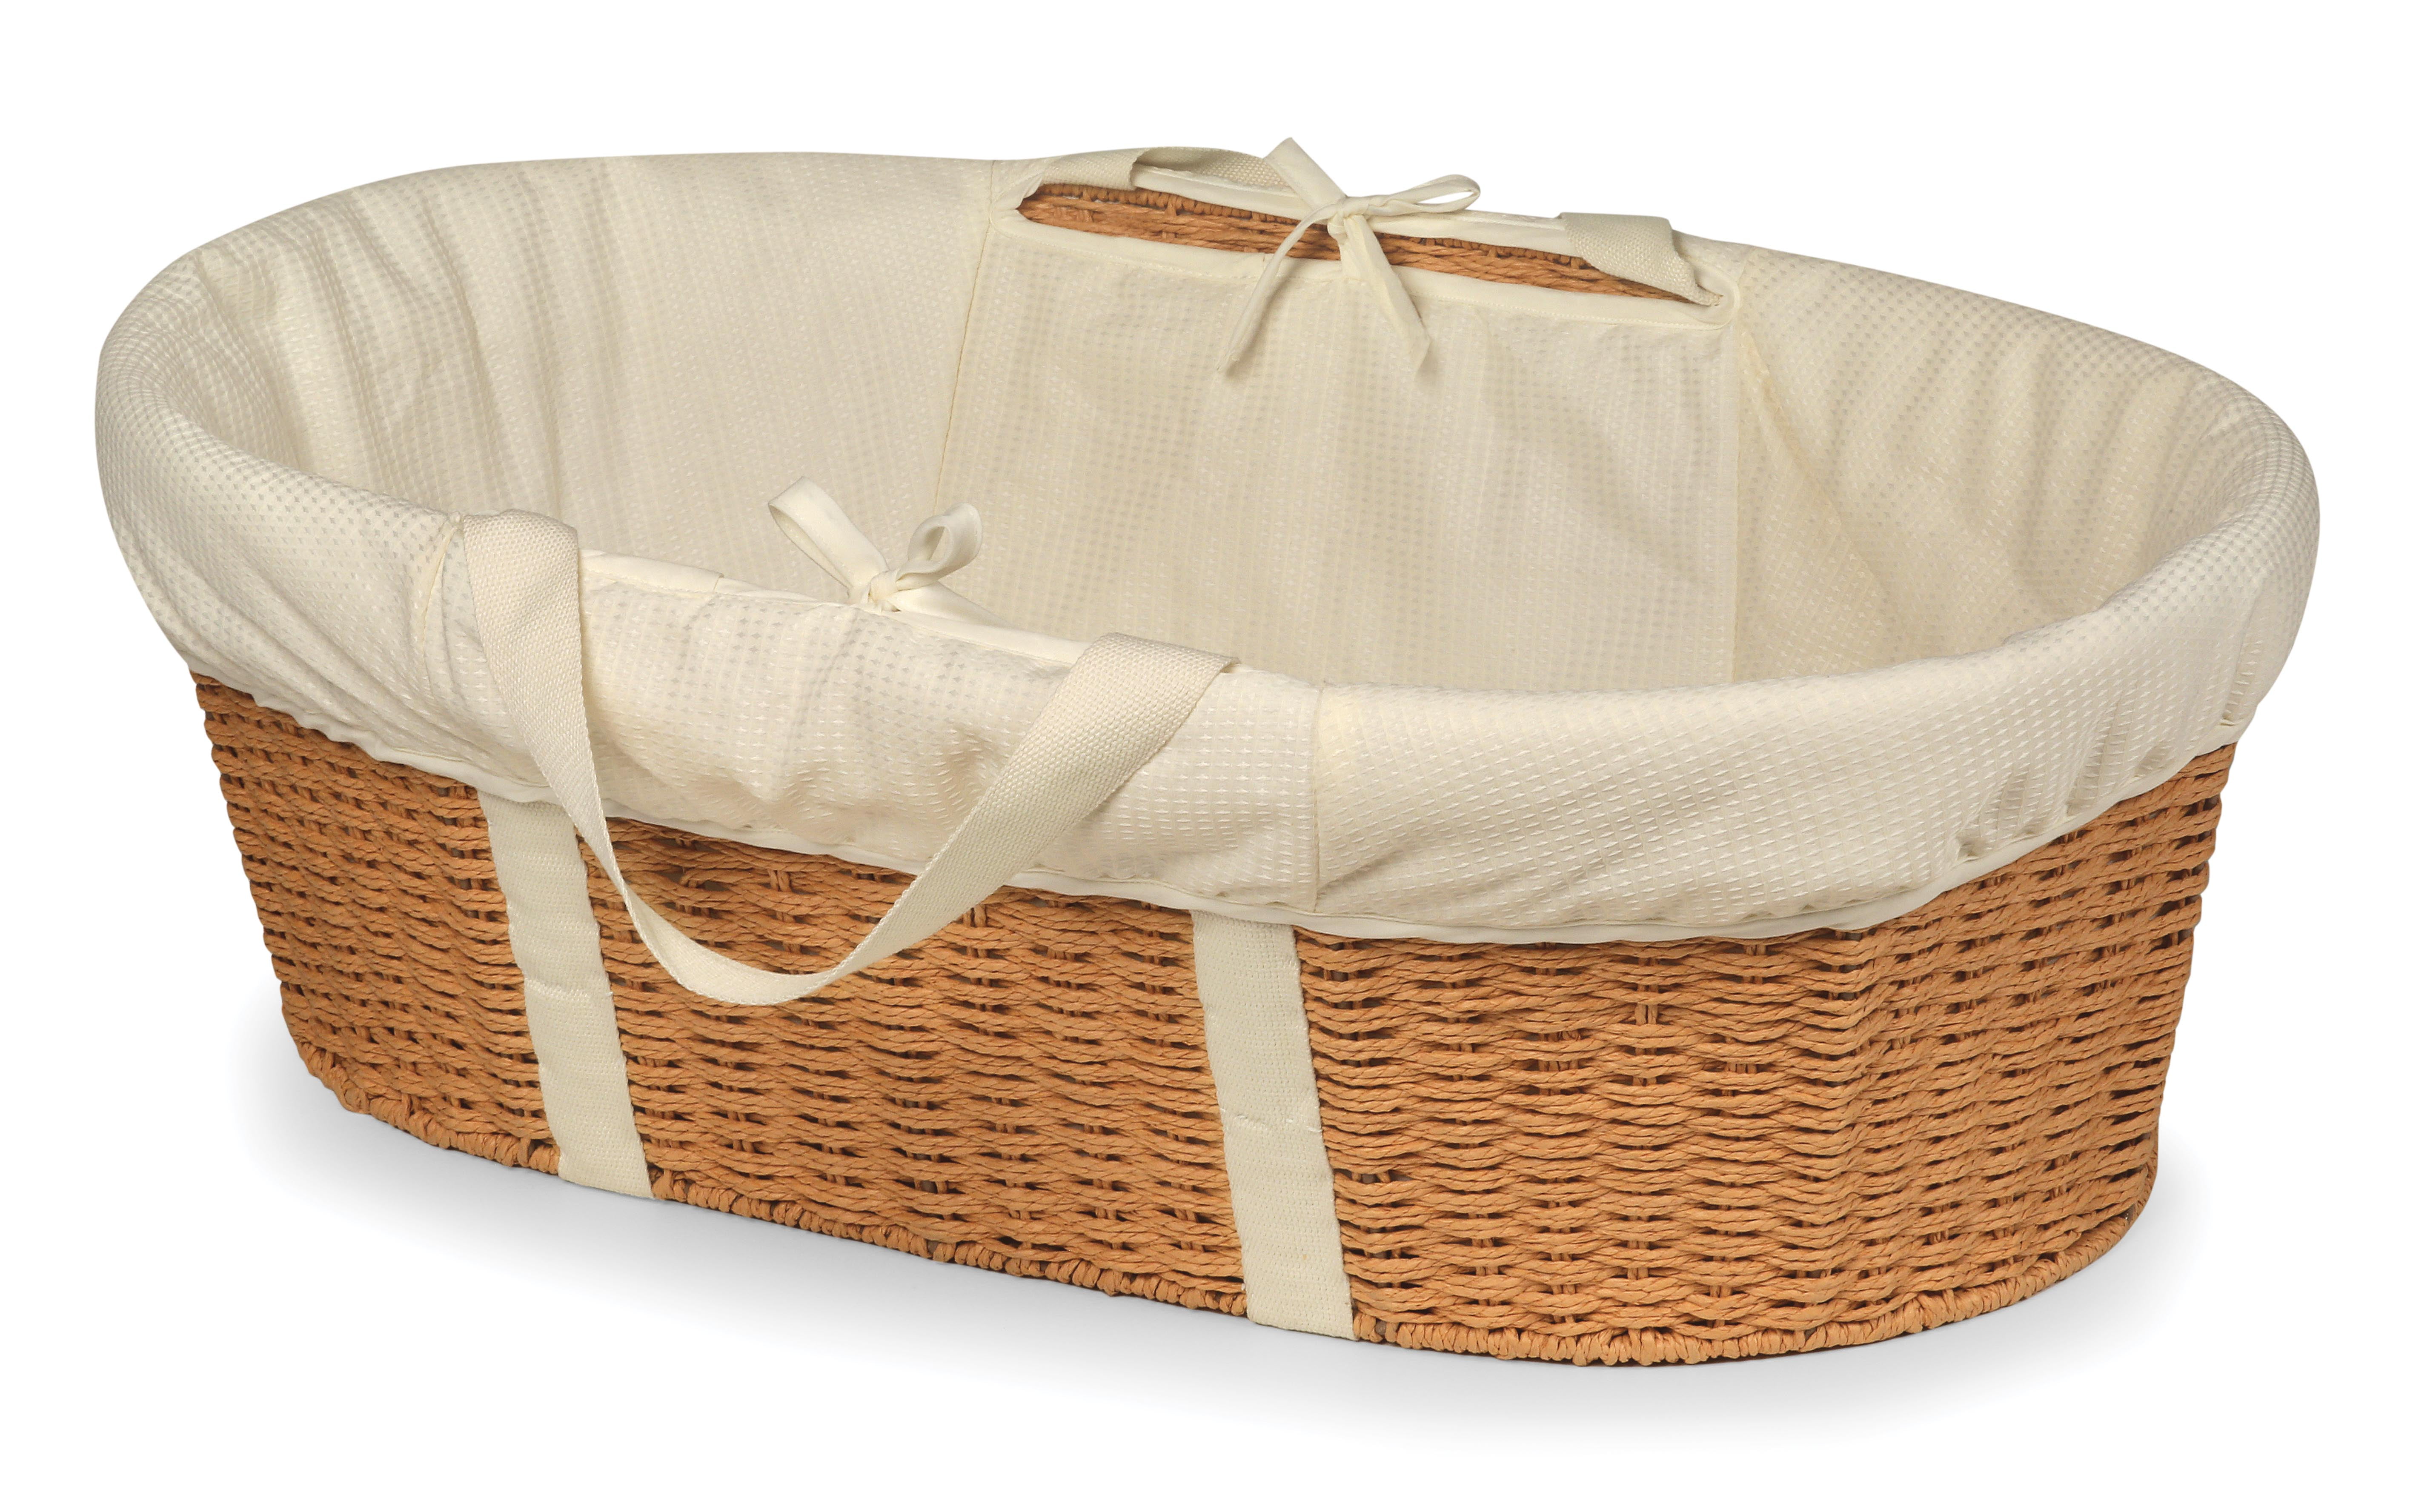 7 COLOURS LARGE SWEET DREAMS NEW WICKER MOSES BASKET WITH BEDDING SET AND STAND 